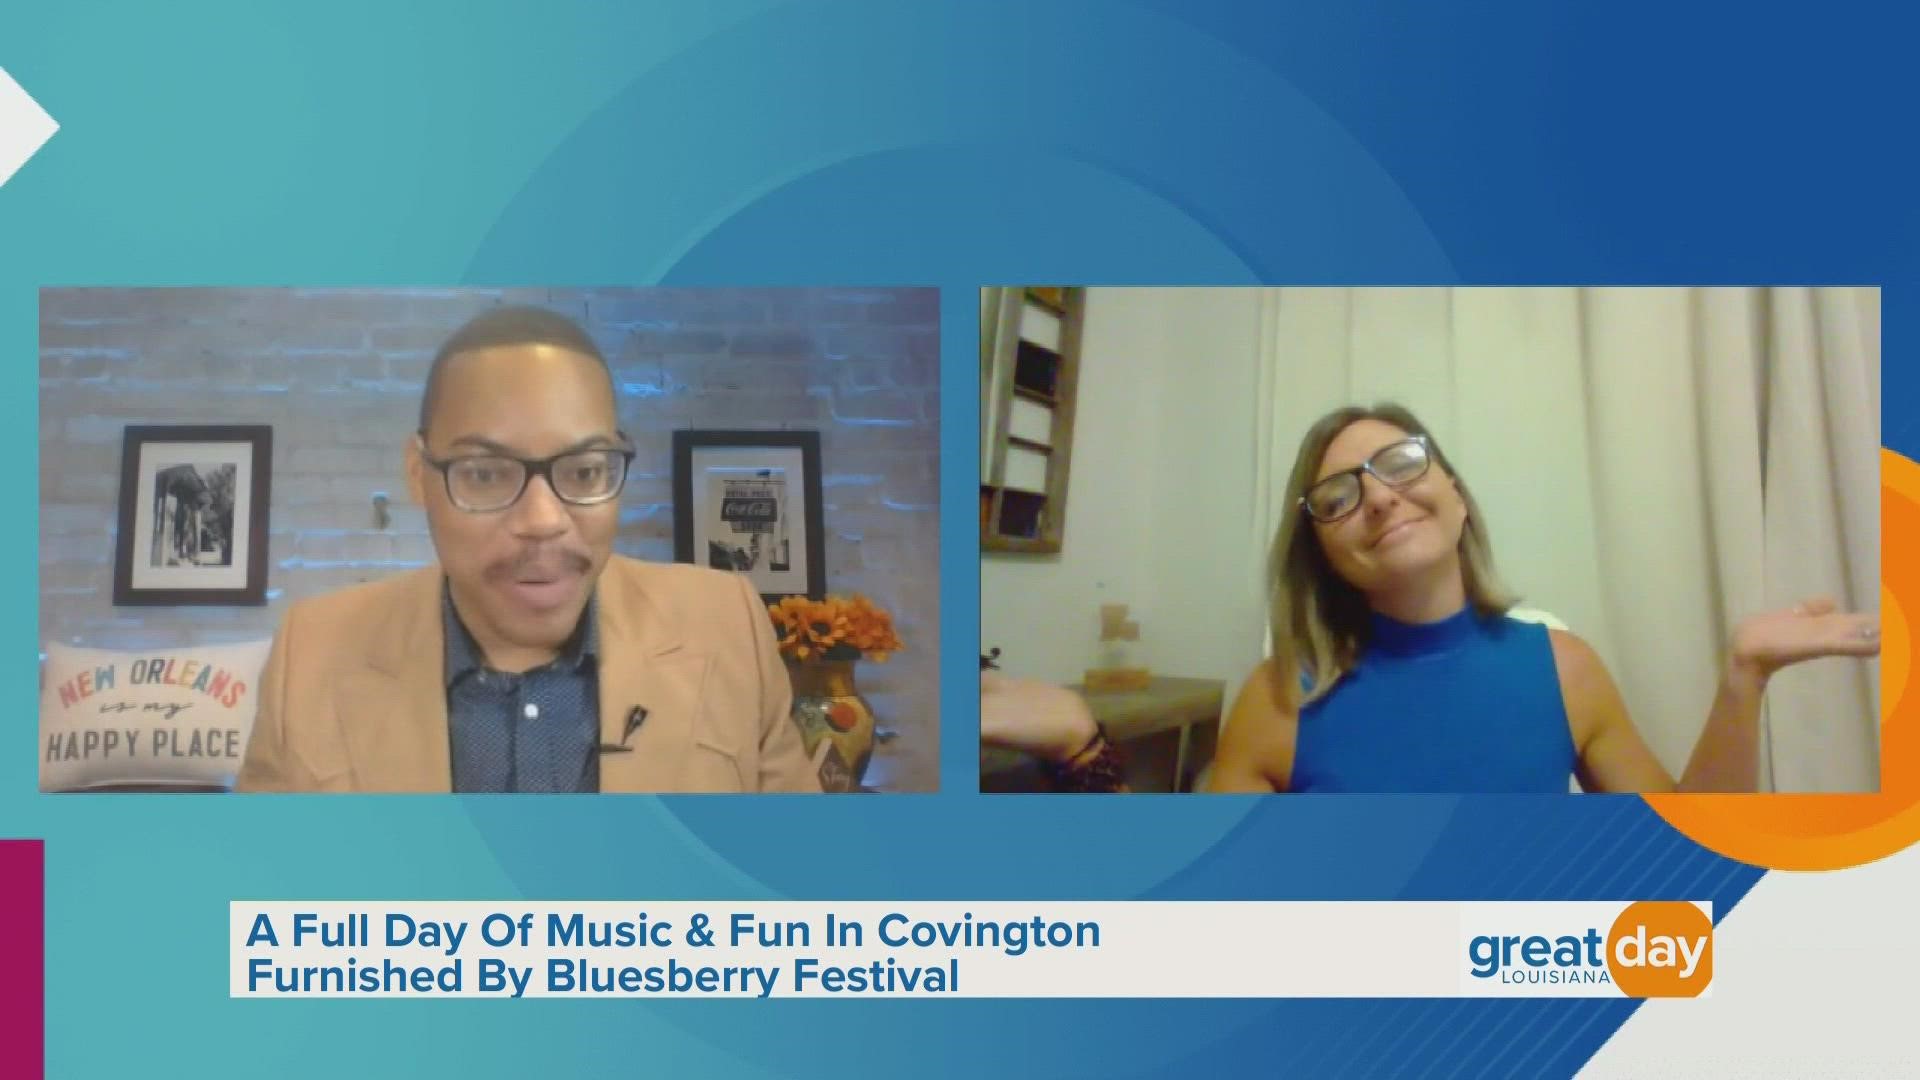 The co-organizer of "The Bluesberry Festival" shared details about the event and one of the featured performers shared a song.